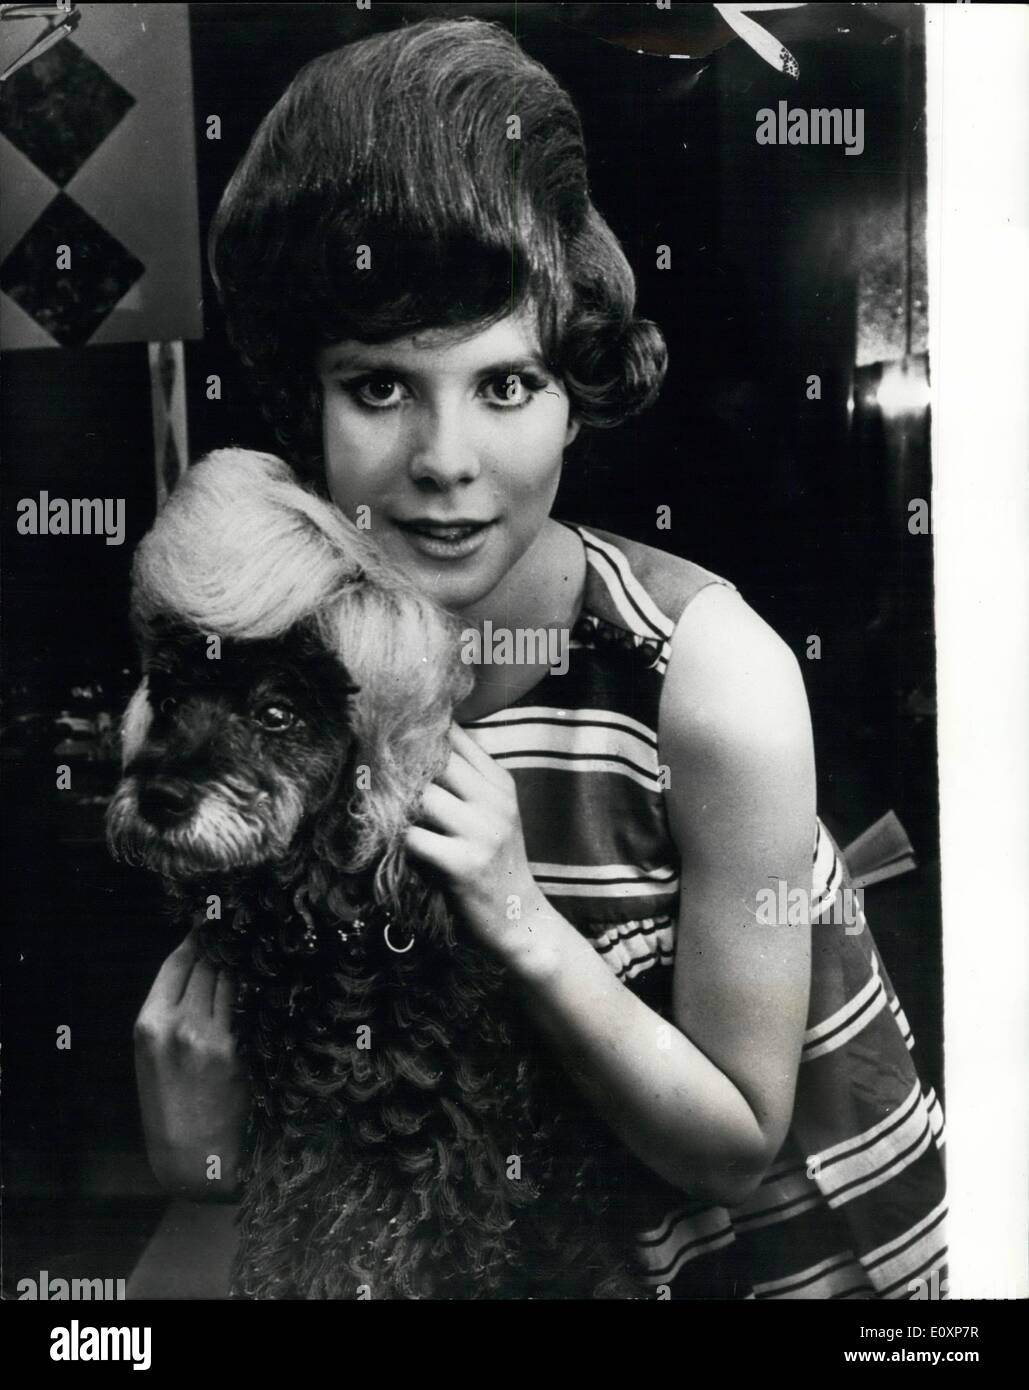 Jul. 07, 1967 - A wig costs rather a lot even for a dog: Nothing, it seems is too good for a poodle. The wear jewelery have their toe-nails painted, and now they are patronizing a hairdressing salon in Knights bridge,London. For 2 guineas Raimondi Biagio will give a poodle a shampoo and set while its owner gets the same treatment in the next chair. For 8 guineas to 21 guineas, he will provide a poodle with a made to measure wig made from human hair. Orders for top knot wigs for poodles, fringes for a Yorkshire terriers, manes for barzeis are pouring in Mr. Biagio said Stock Photo